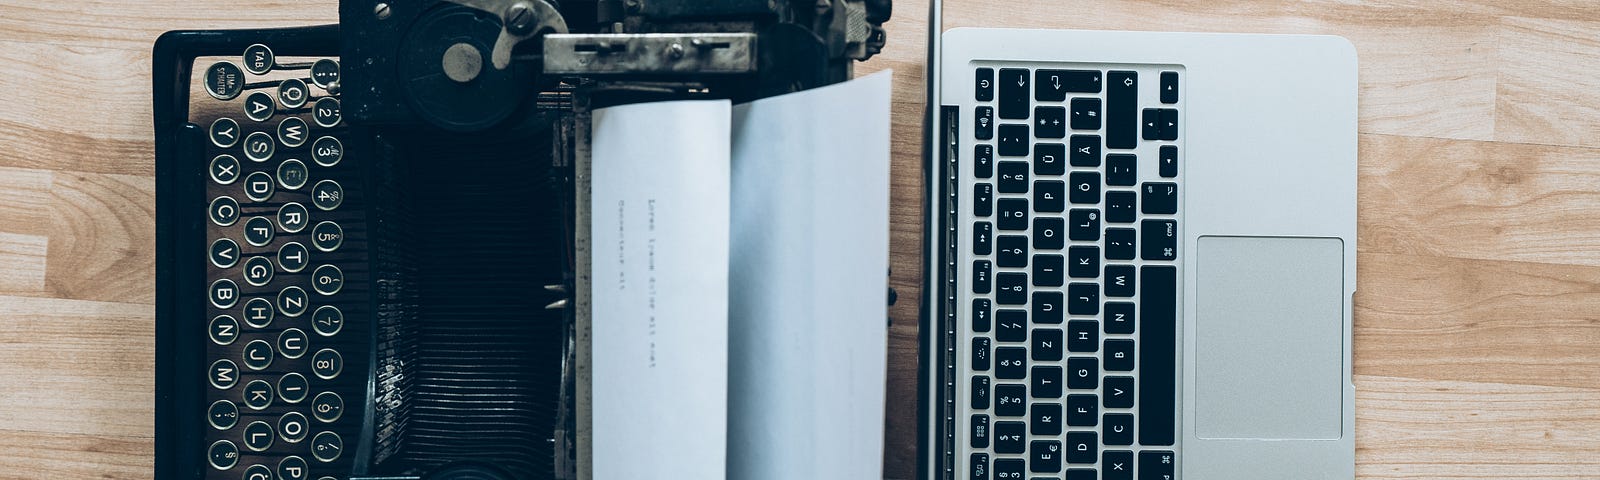 A typewriter with paper next to a modern laptop.